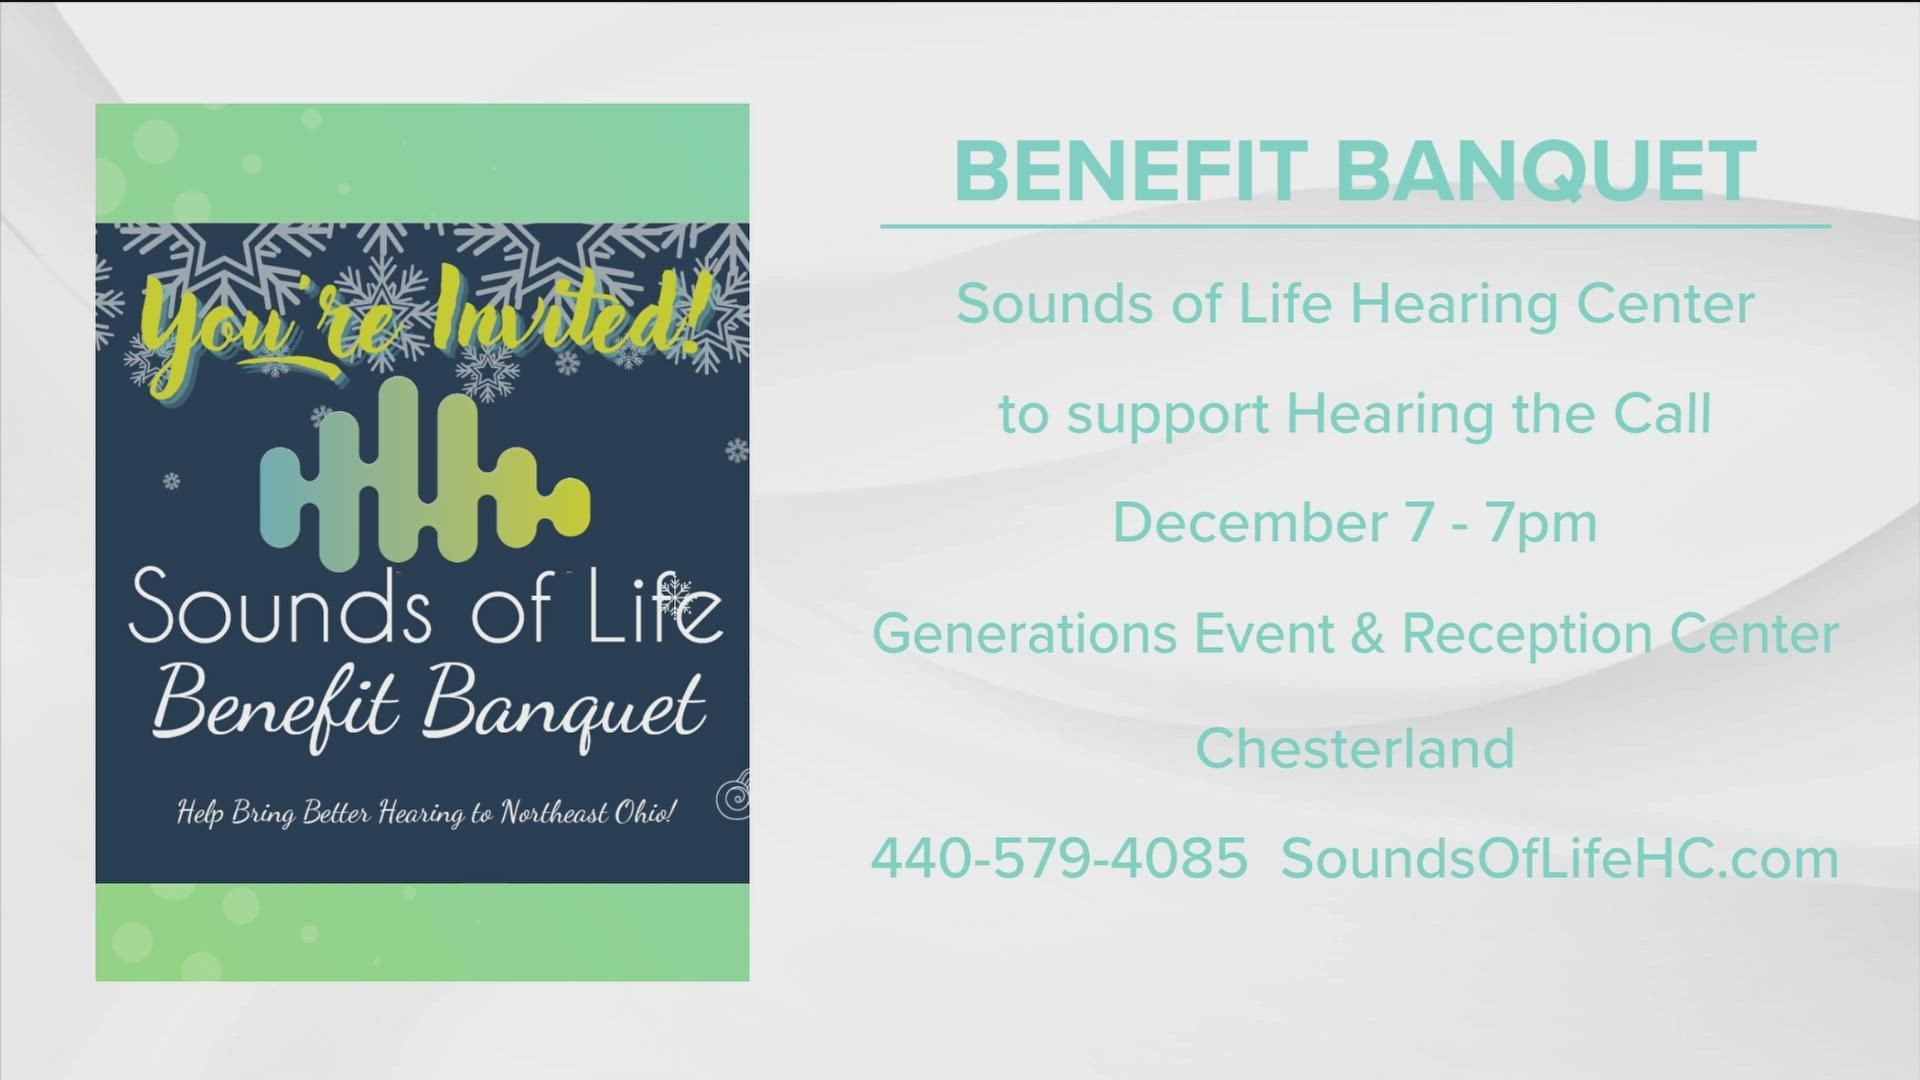 Joe and Ciarra talk with Sarah Curtis, AuD, about the benefit banquet coming to Chesterland! Sponsored by: Sounds of Life Hearing Center